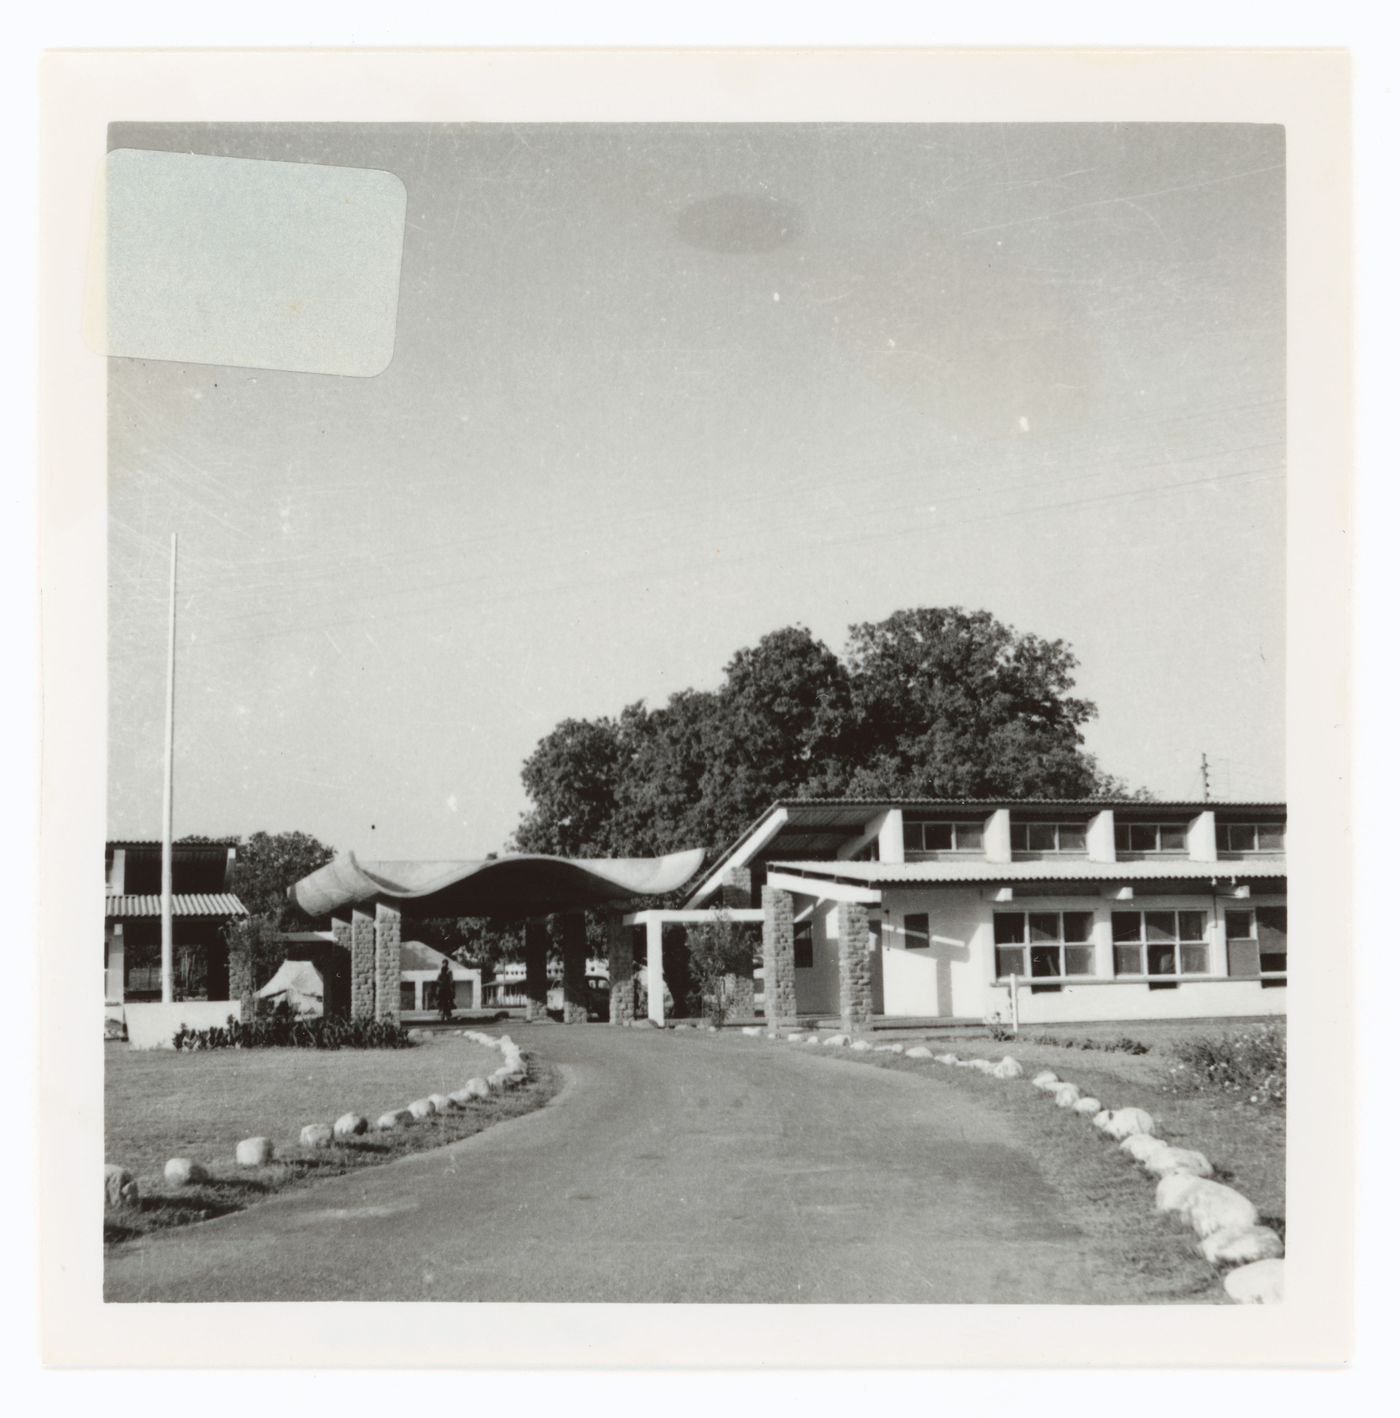 Partial view of the Architect's Office with portico, Sector 19, Chandigarh, India